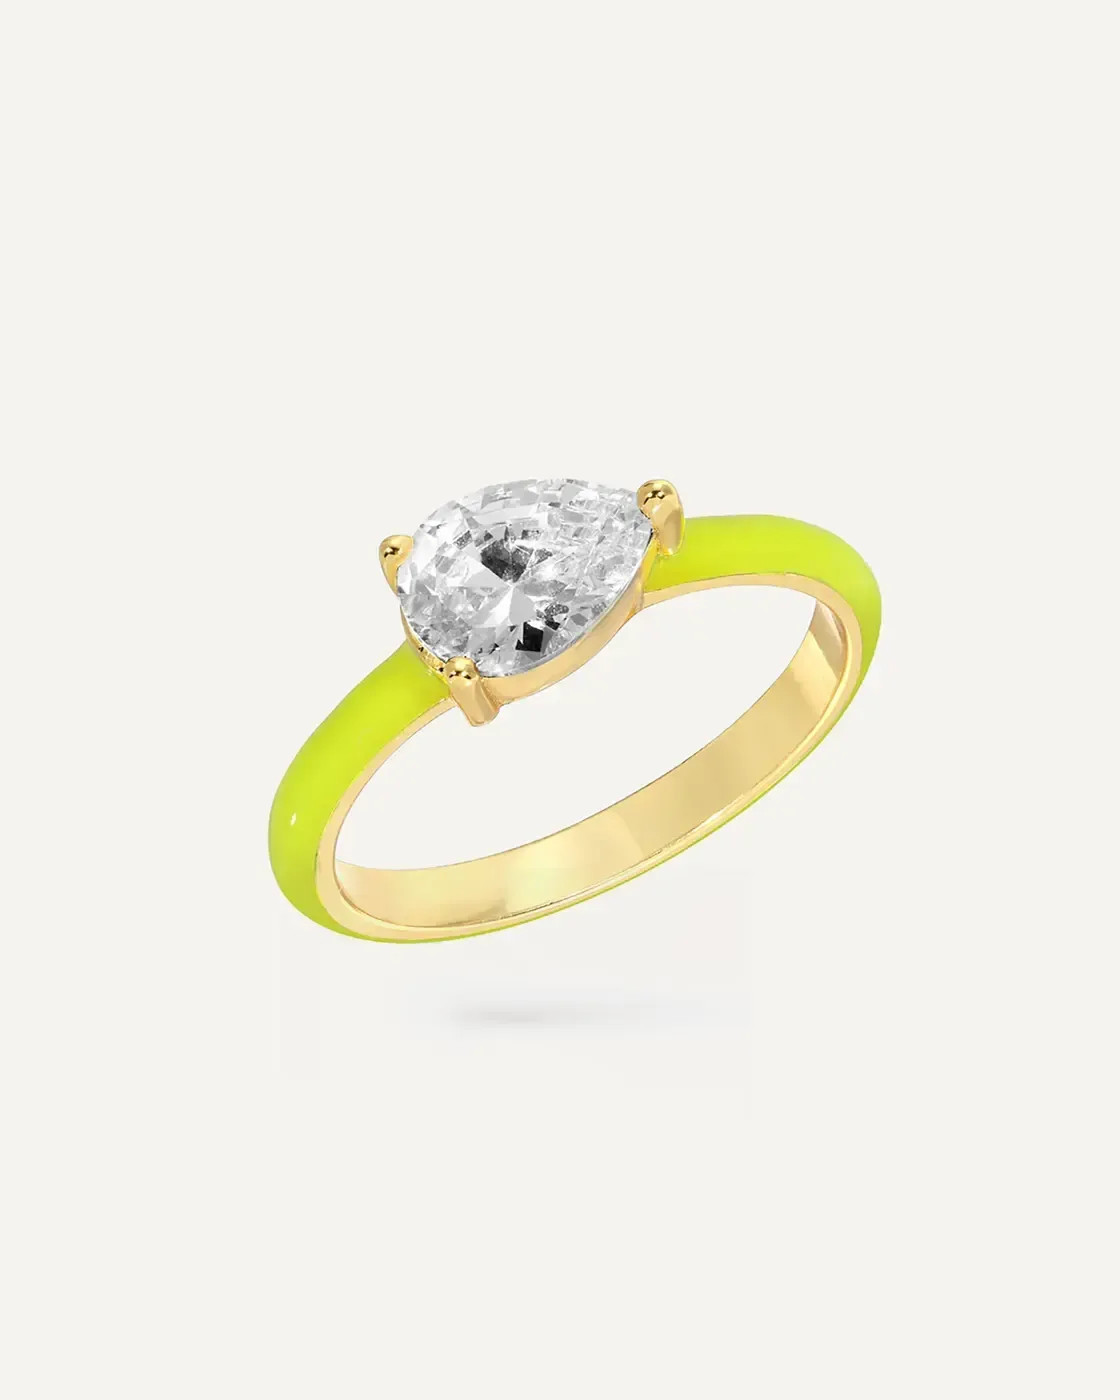 The 90210 Gold-Plated Neon Green Ring